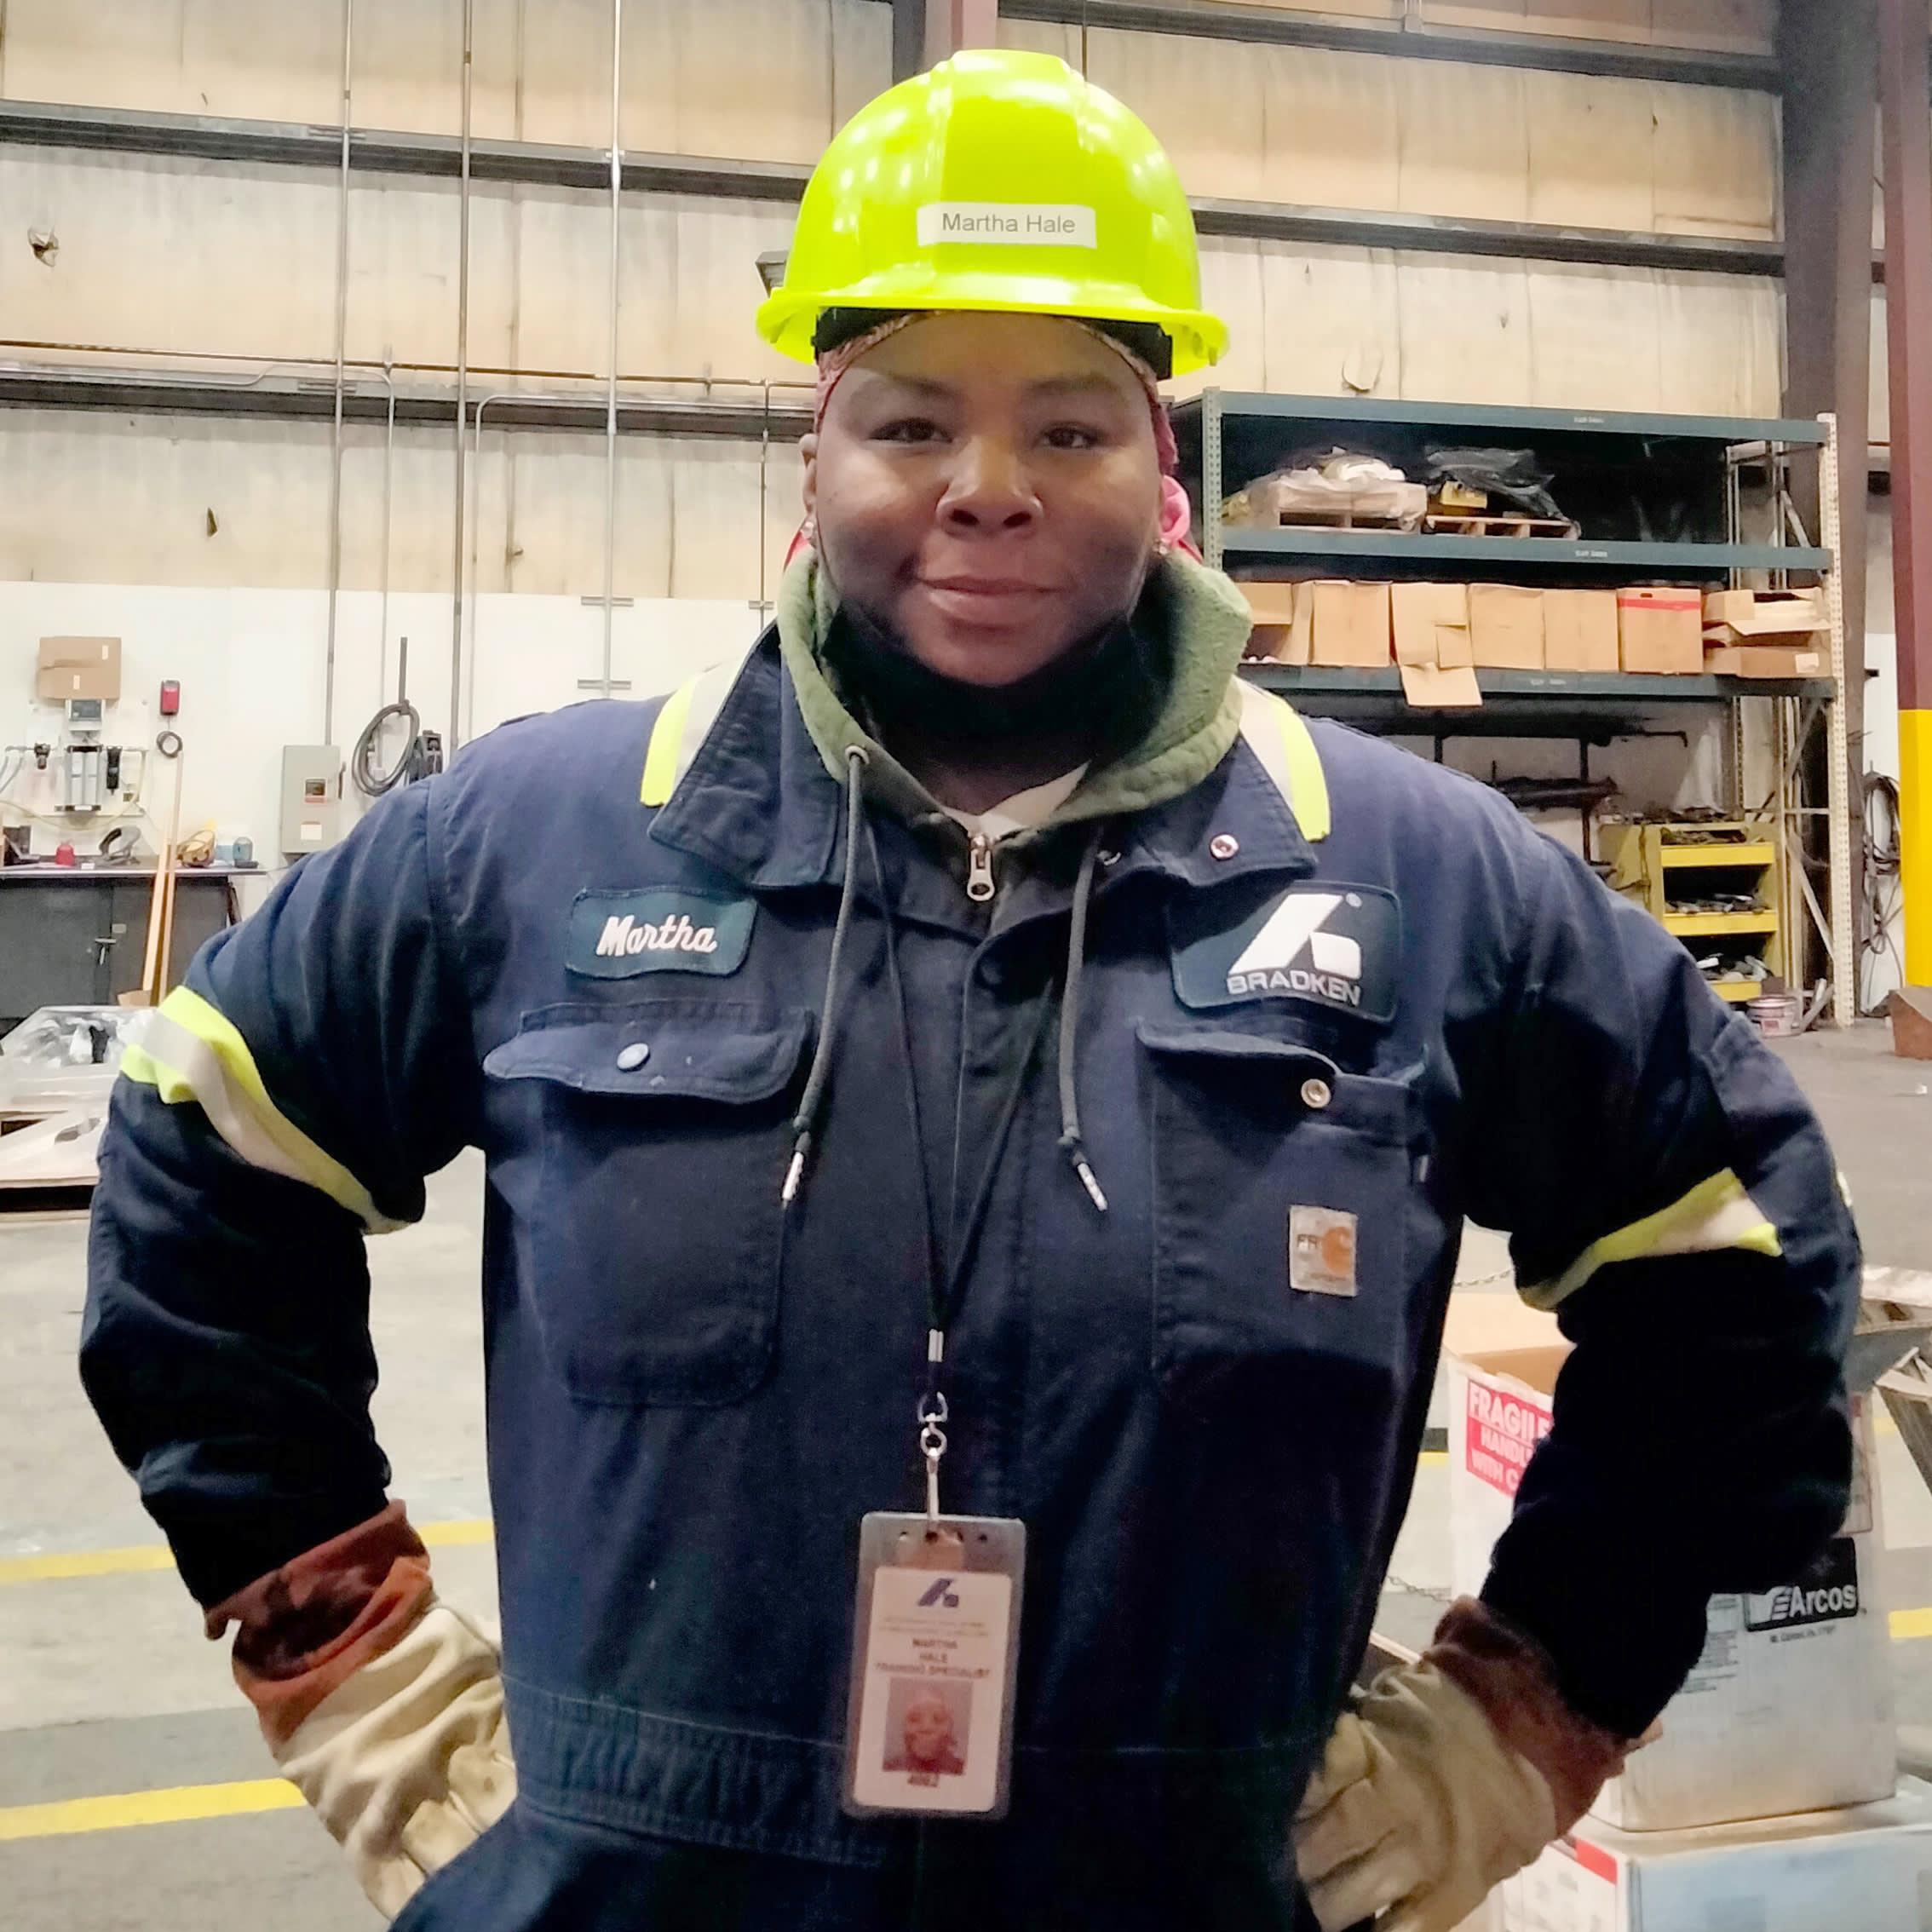 Martha Hale Training Specialist from Tacoma, USA pictured with a trainee welder